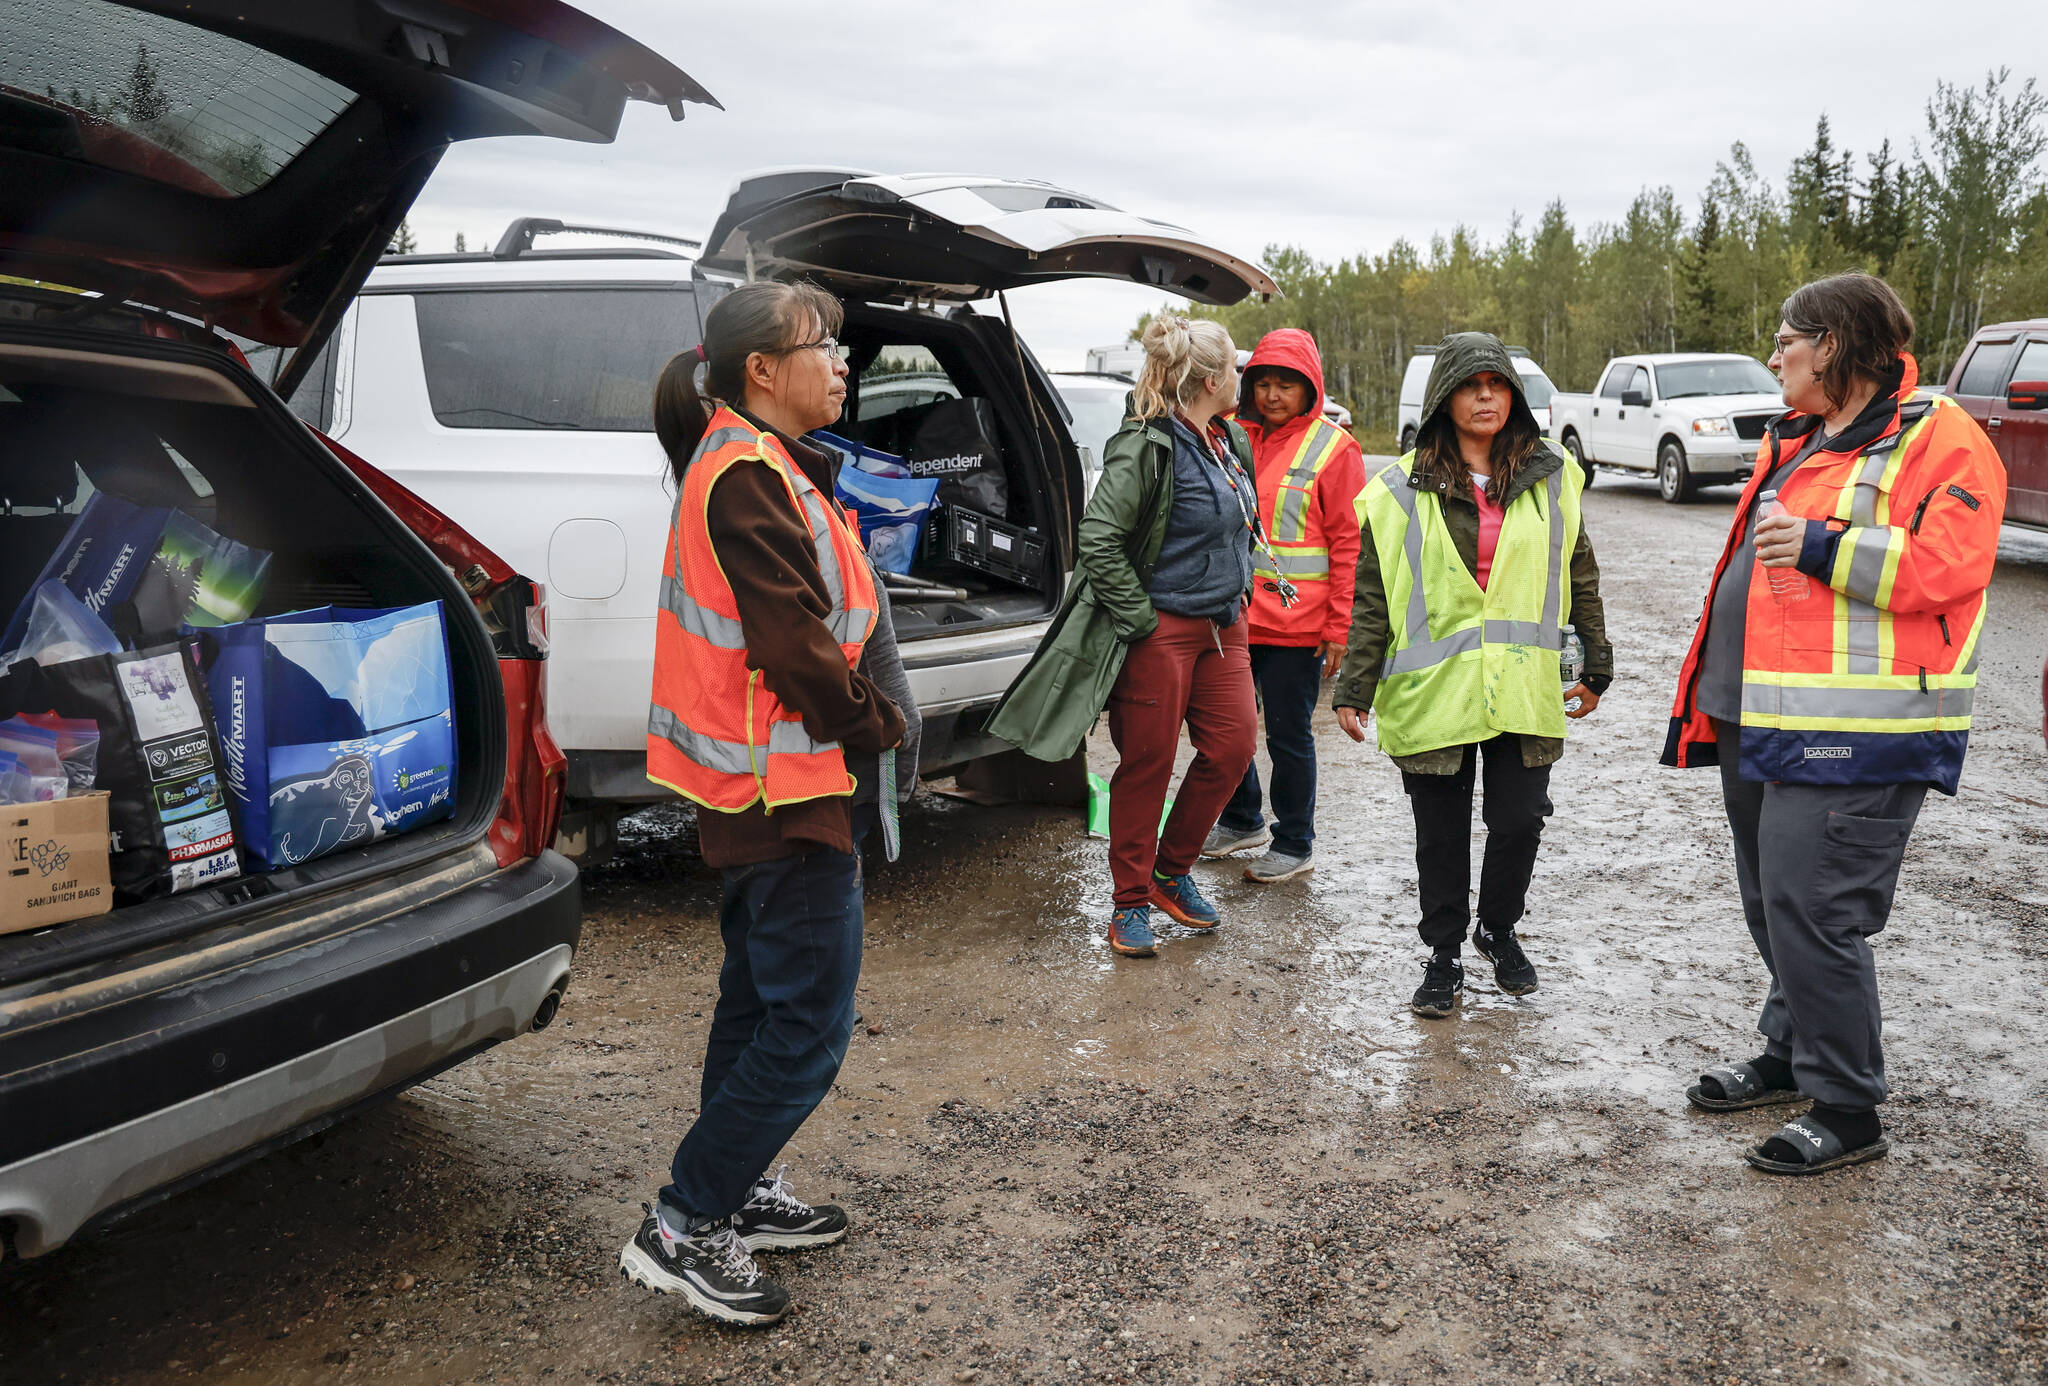 Volunteers prepare to hand out packed lunches to people lining up for fuel at Fort Providence, N.W.T., on the only road south from Yellowknife, Thursday, Aug. 17, 2023. Three weeks later, residents are returning to the city. THE CANADIAN PRESS/Jeff McIntosh